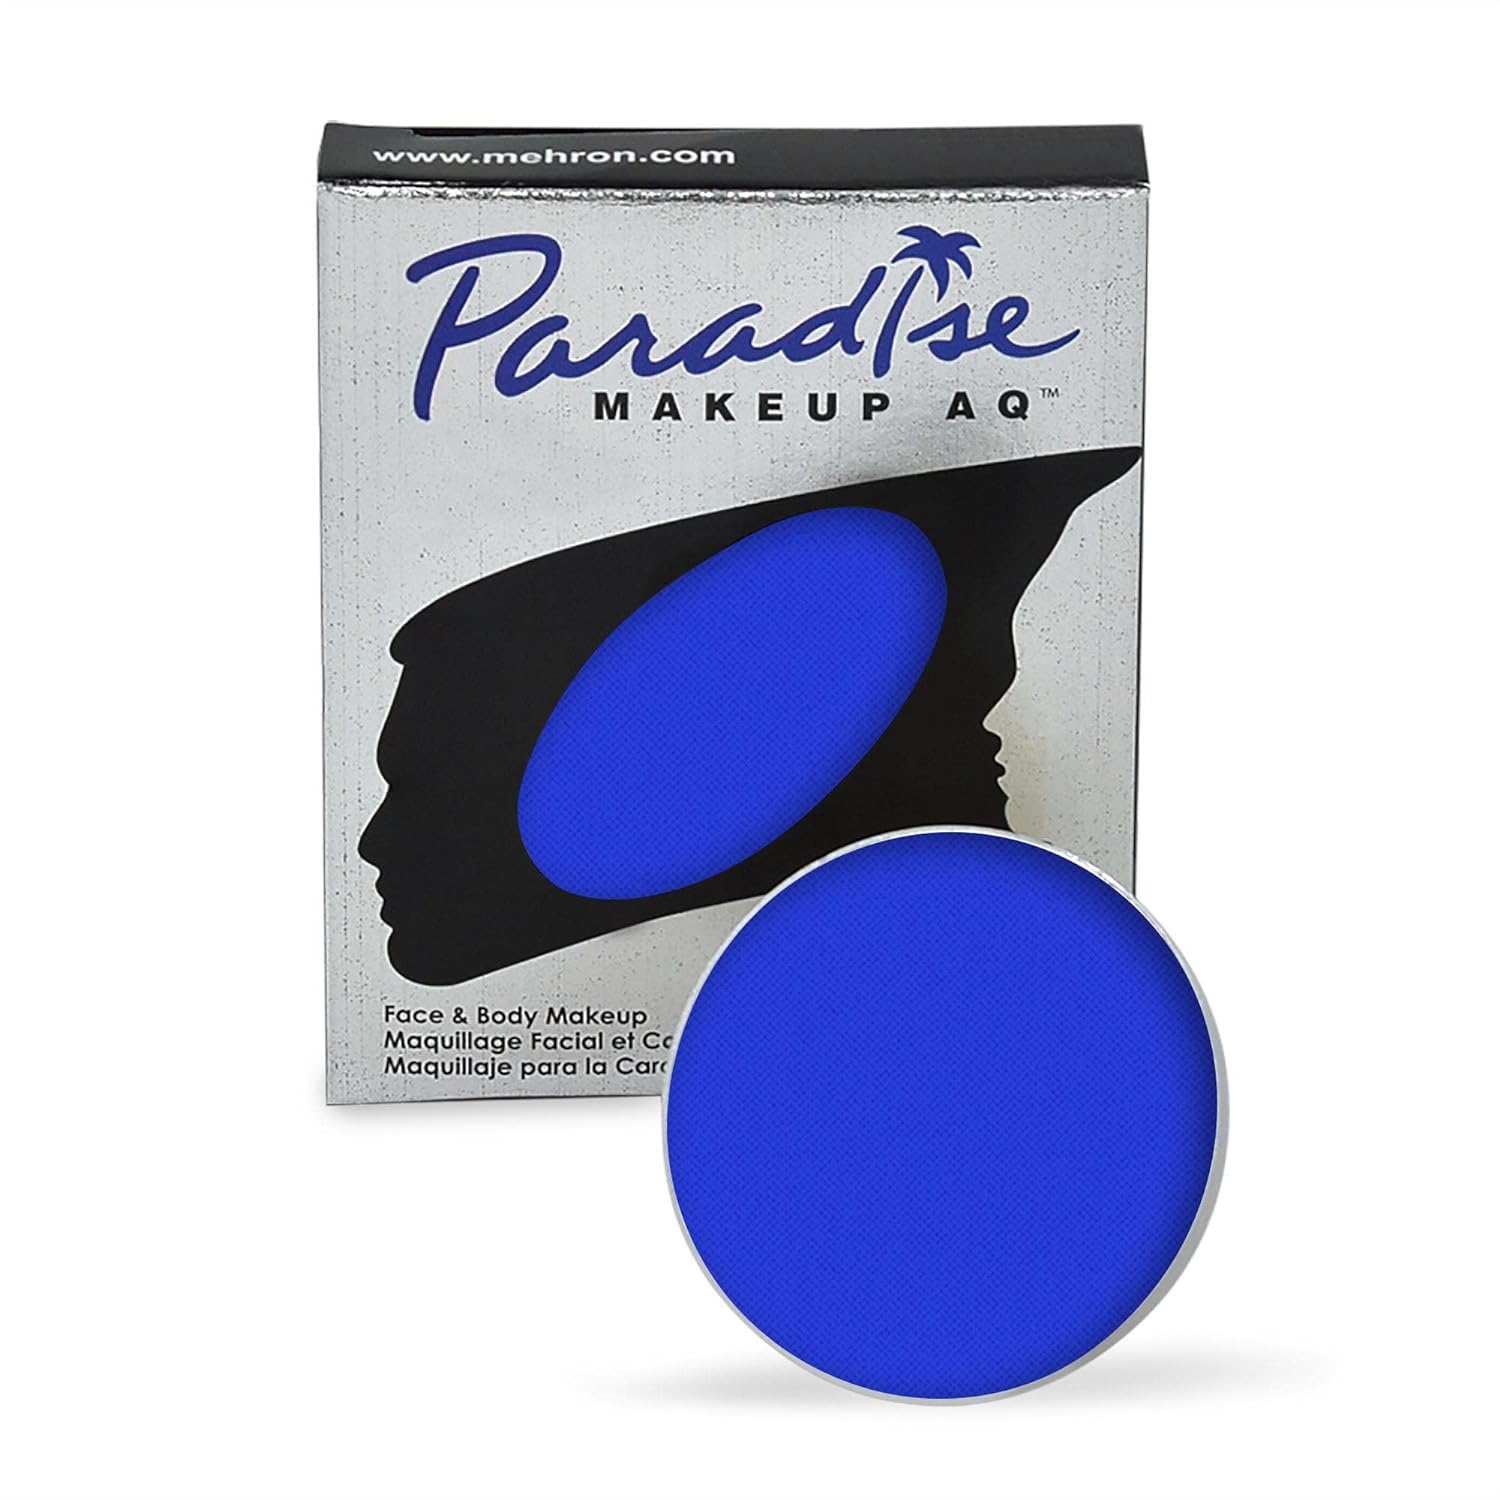 Mehron Makeup Paradise Makeup AQ Refill Size | Perfect for Stage & Screen Performance, Face & Body Painting, Beauty, Cosplay, and Halloween | Water Activated Face Paint, Body Paint, Cosplay Makeup .25  (7 ) (LAGOON BLUE)